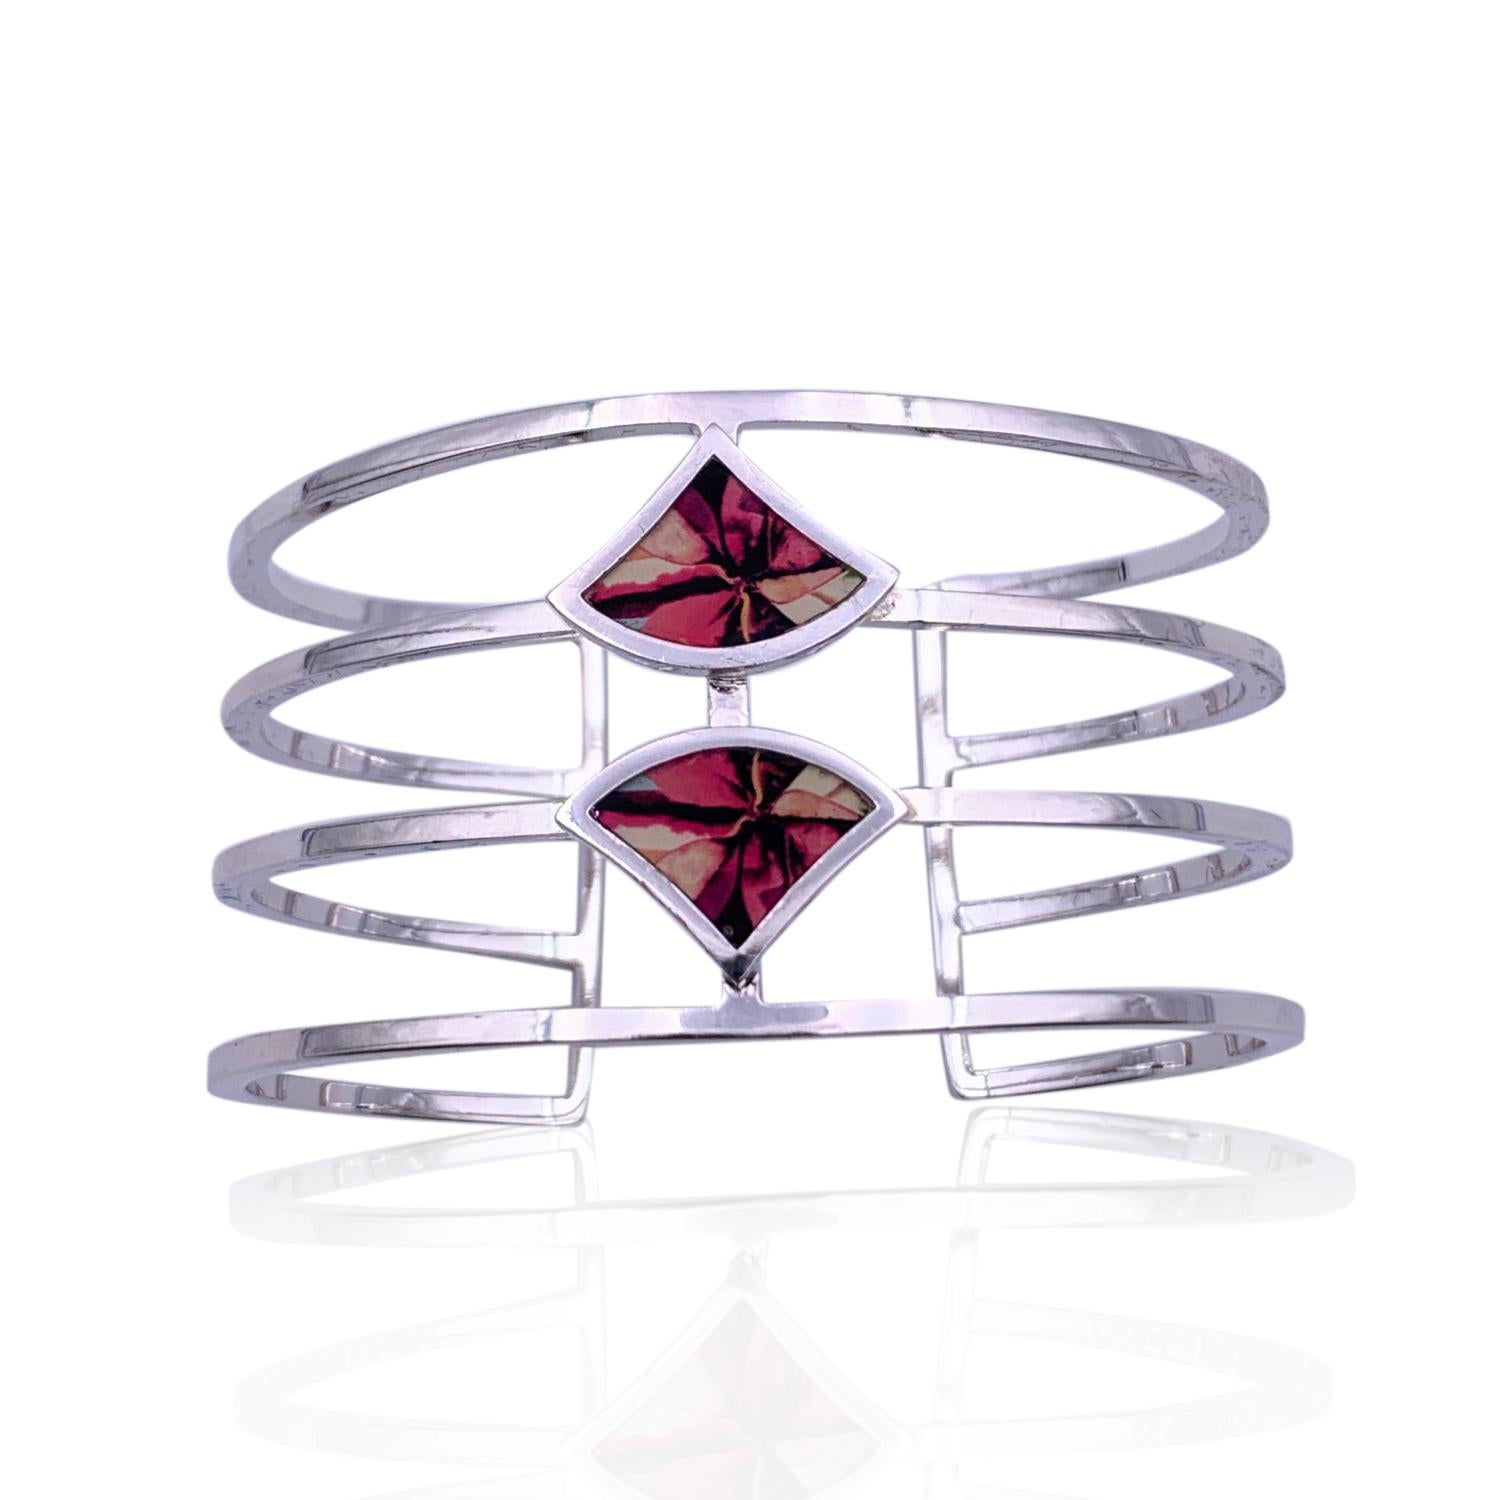 Beautiful cuff bracelet by Christian Lacroix, from the 'Terre de Feux IV' line. Made in silver-tone metal with 2 enameled elements top. Will fit up to approx. 6.25 inches - 16 cm wrist. Inner diameter: 2.25 inches - 5,6 cm. Width: 3.3 cm. 'Christian